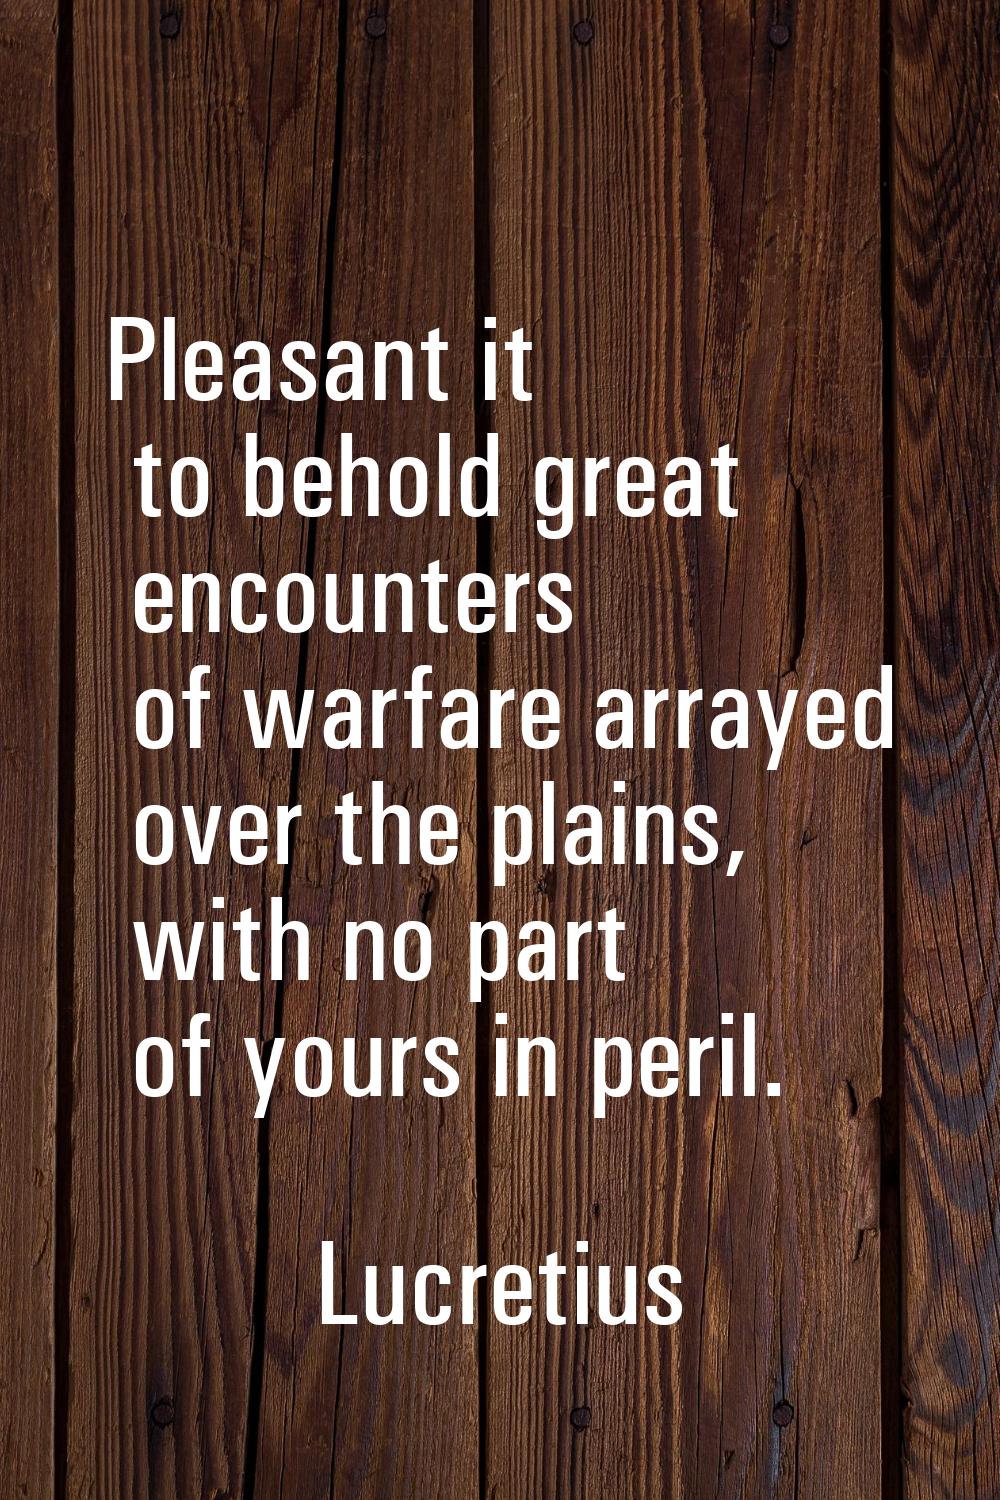 Pleasant it to behold great encounters of warfare arrayed over the plains, with no part of yours in